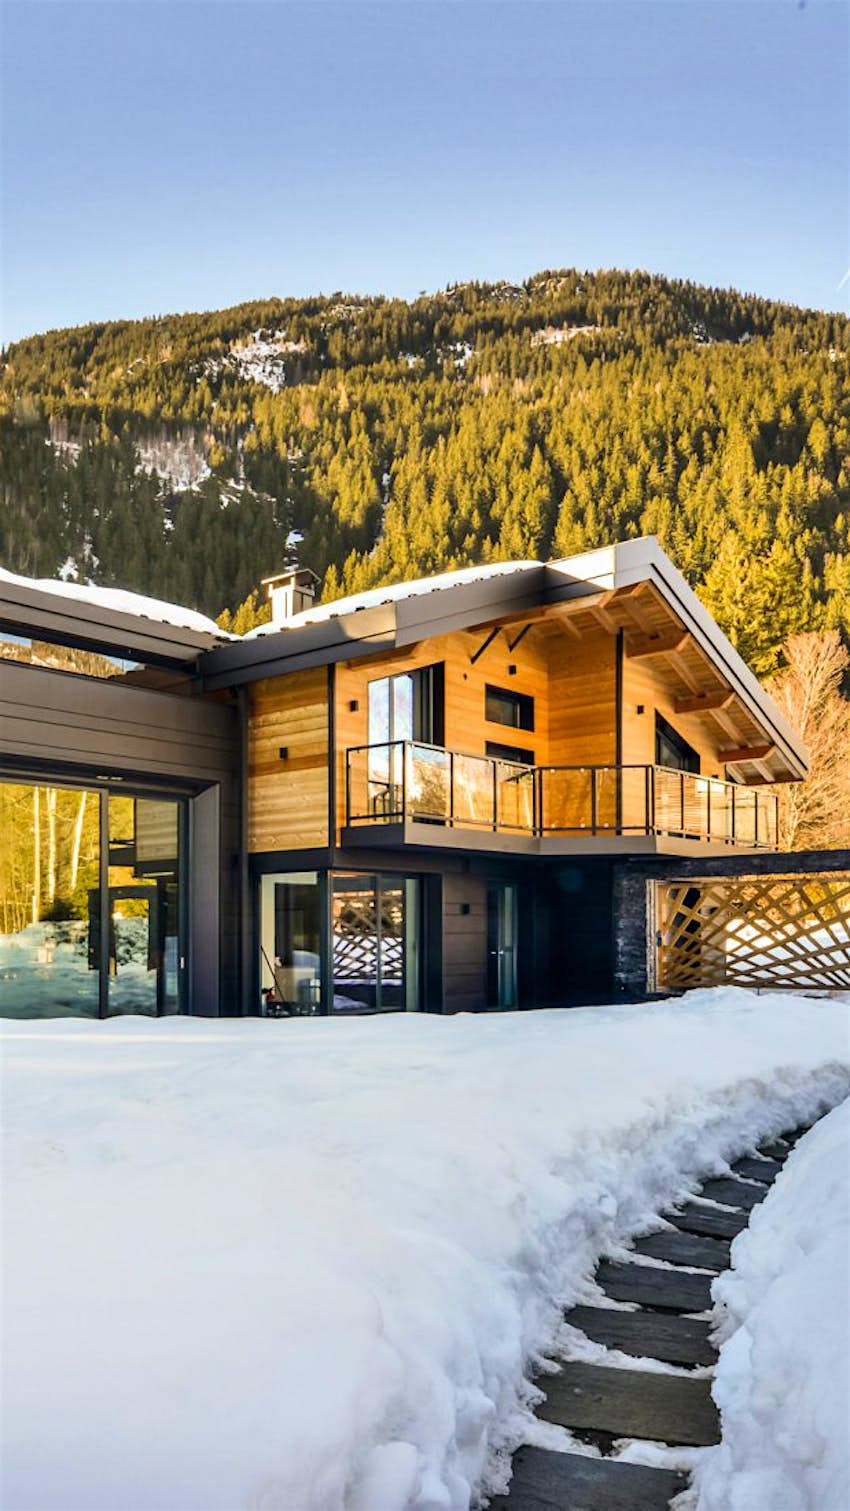 7 winter getaways you can book on Airbnb now - Lonely Planet